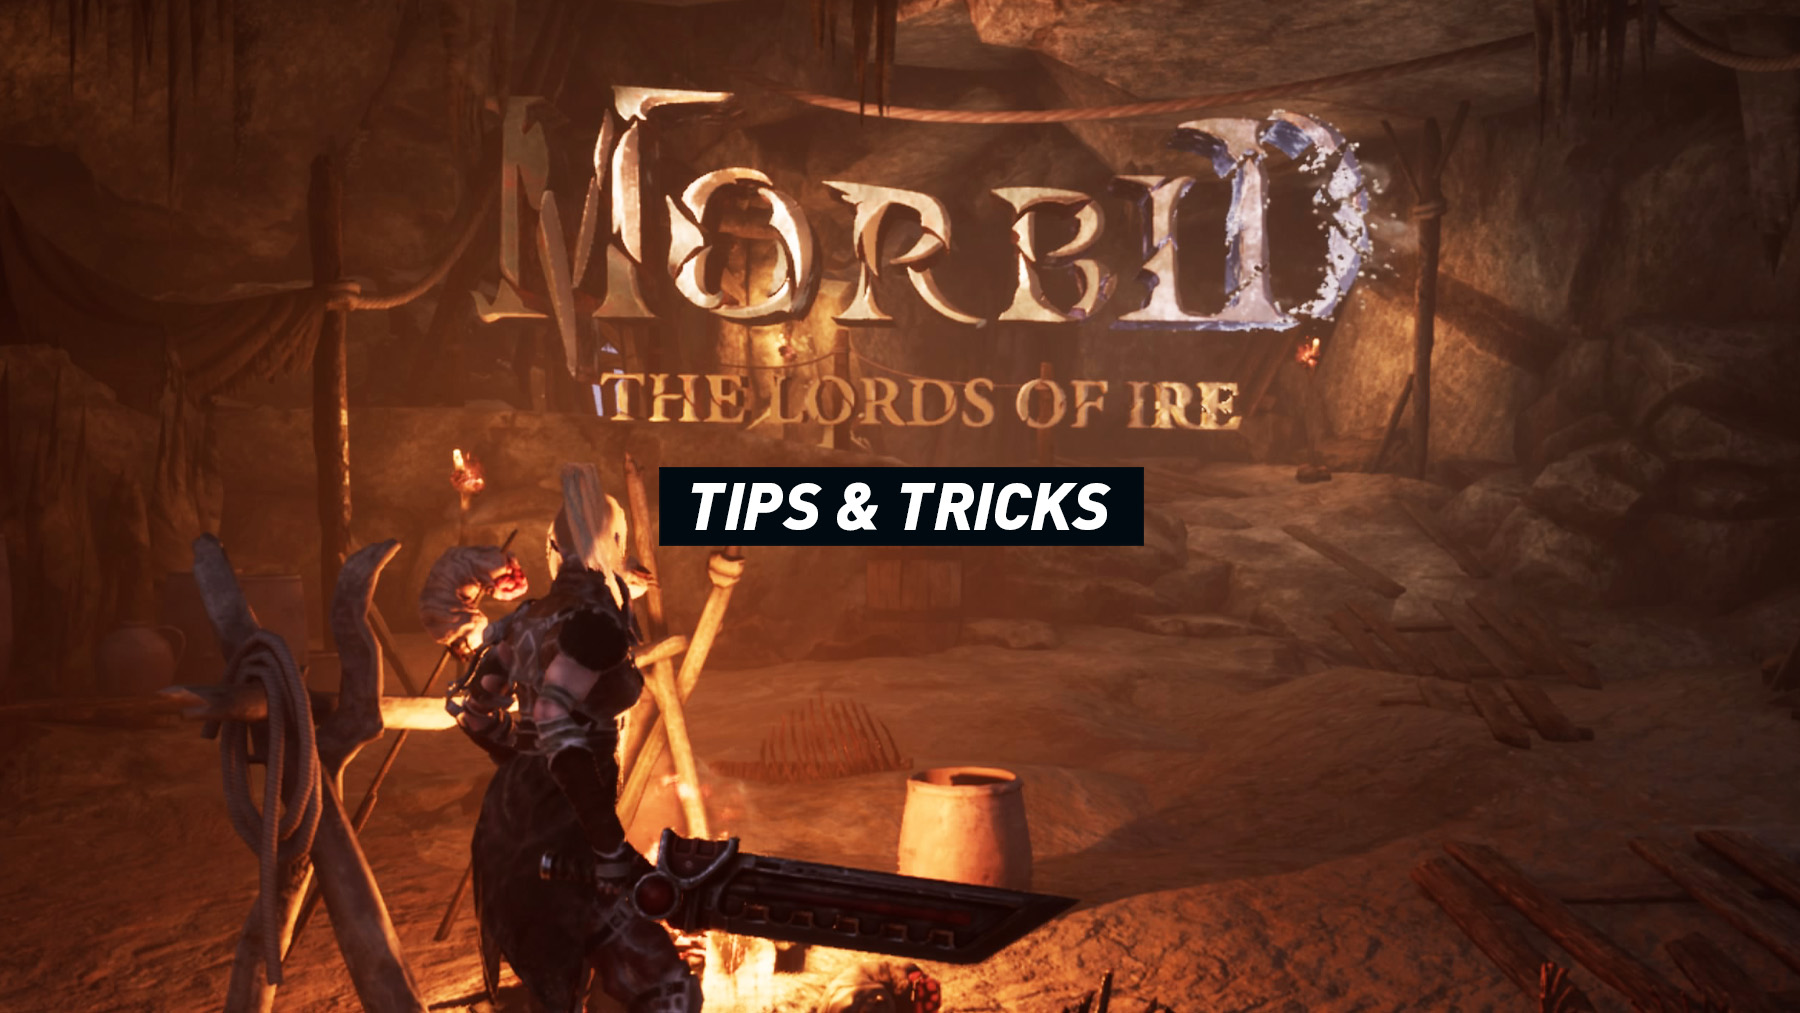 Morbid: The Lords of Ire Tips